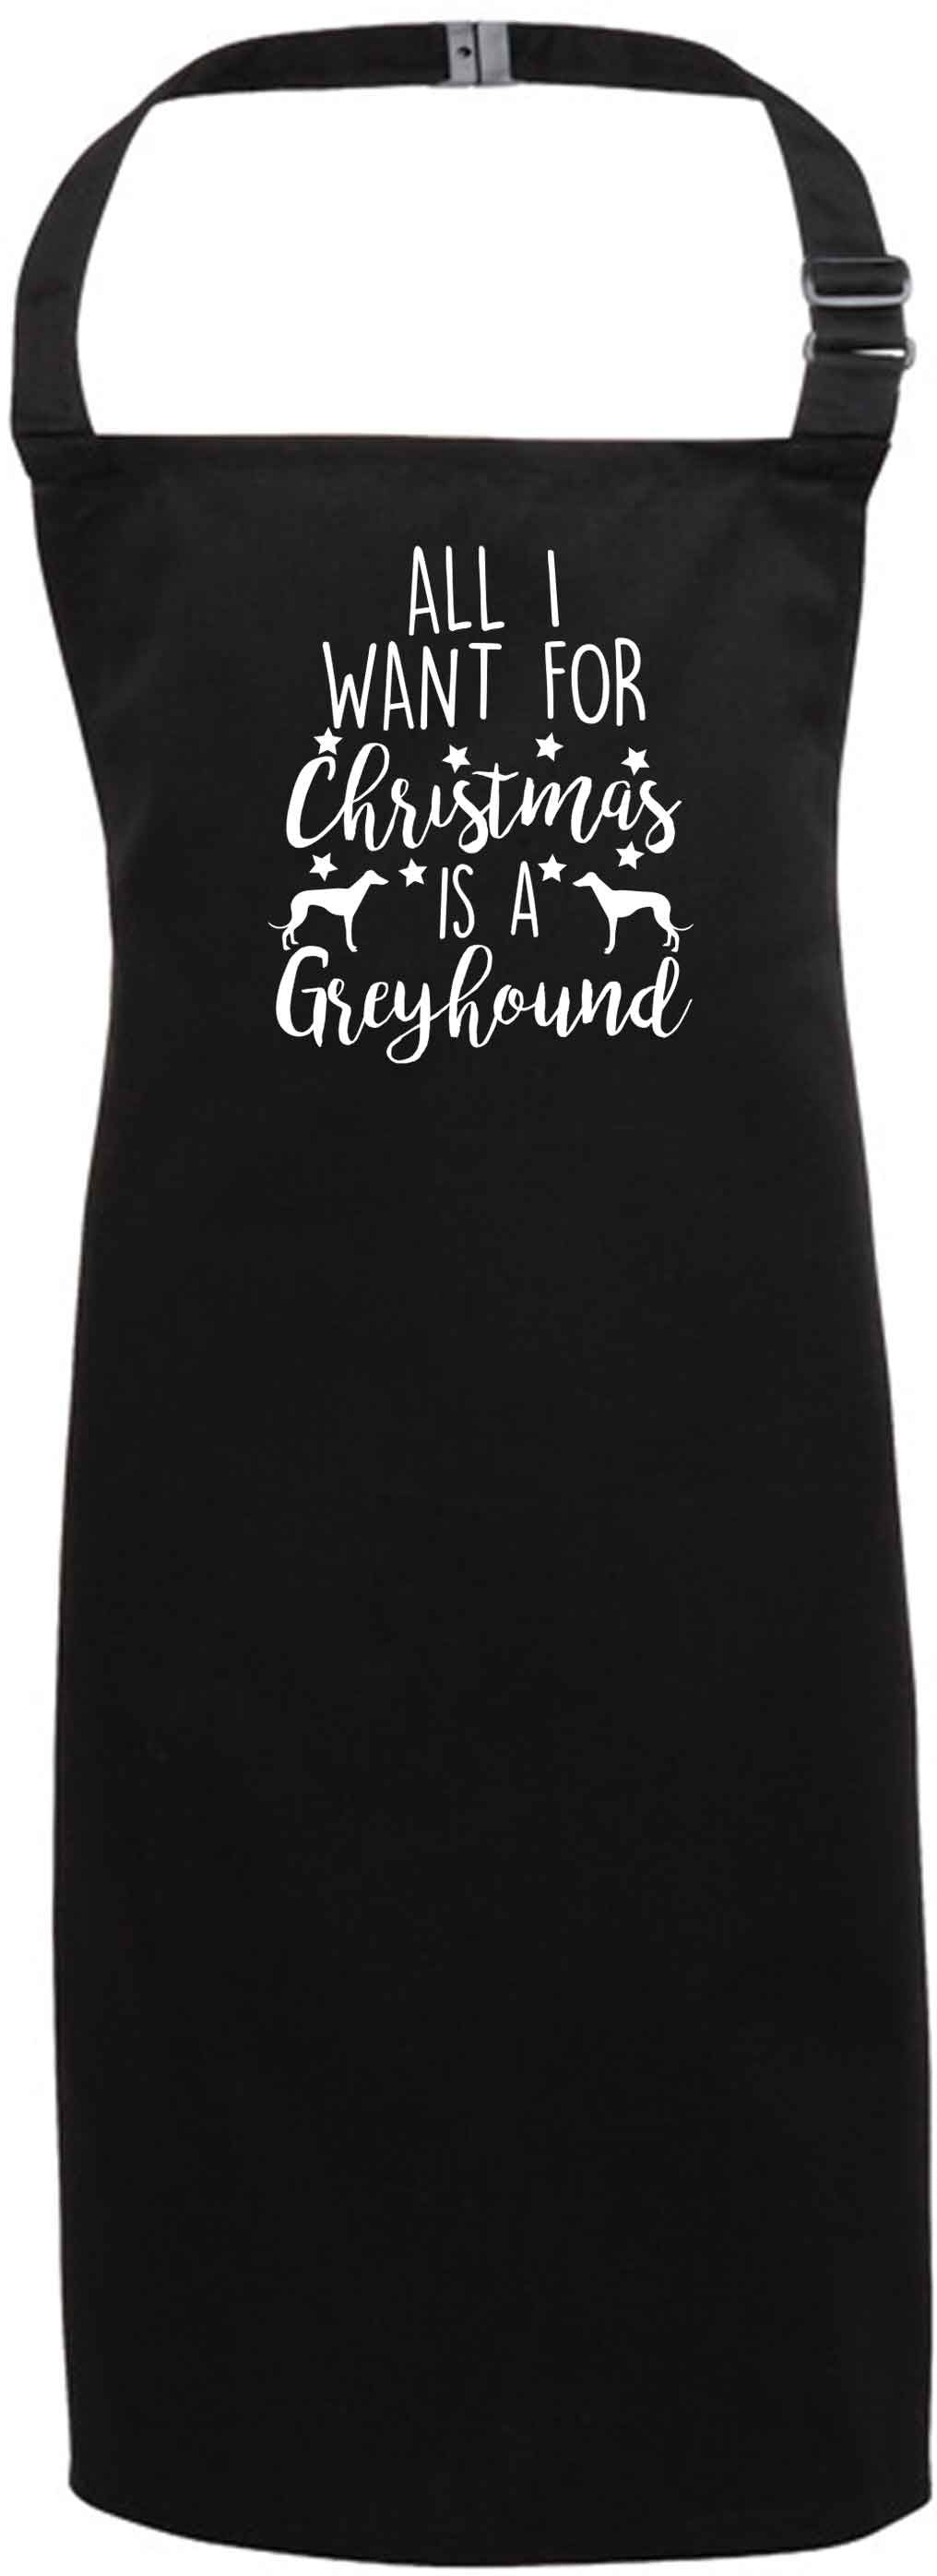 All I want for Christmas is a greyhound black apron 7-10 years